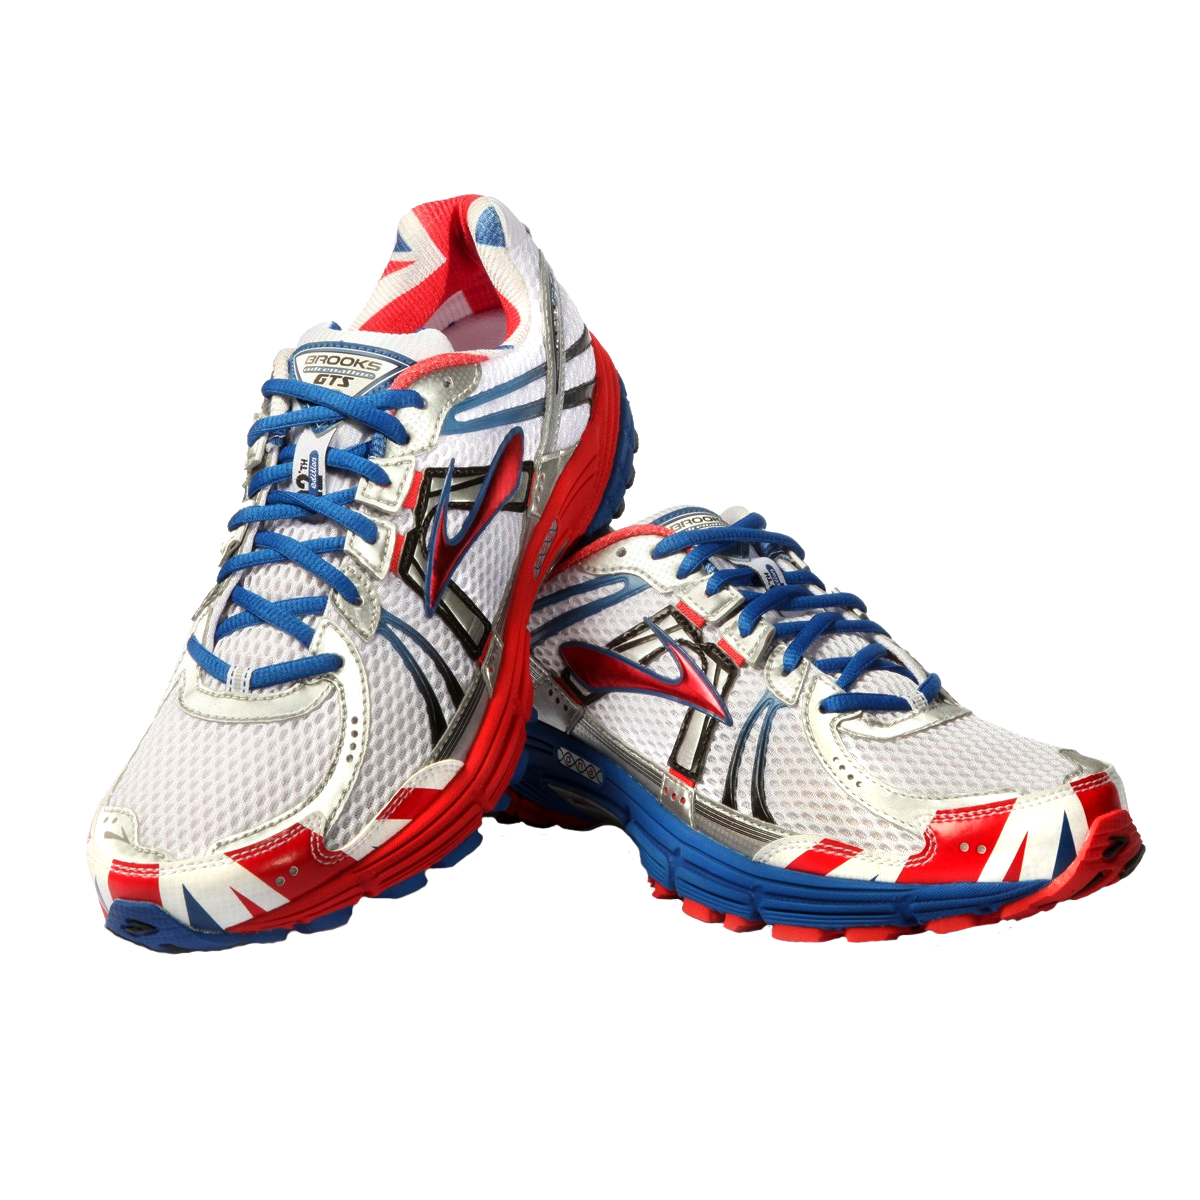 Download Nike Shoes Transparent Background Hq Png Ima - vrogue.co